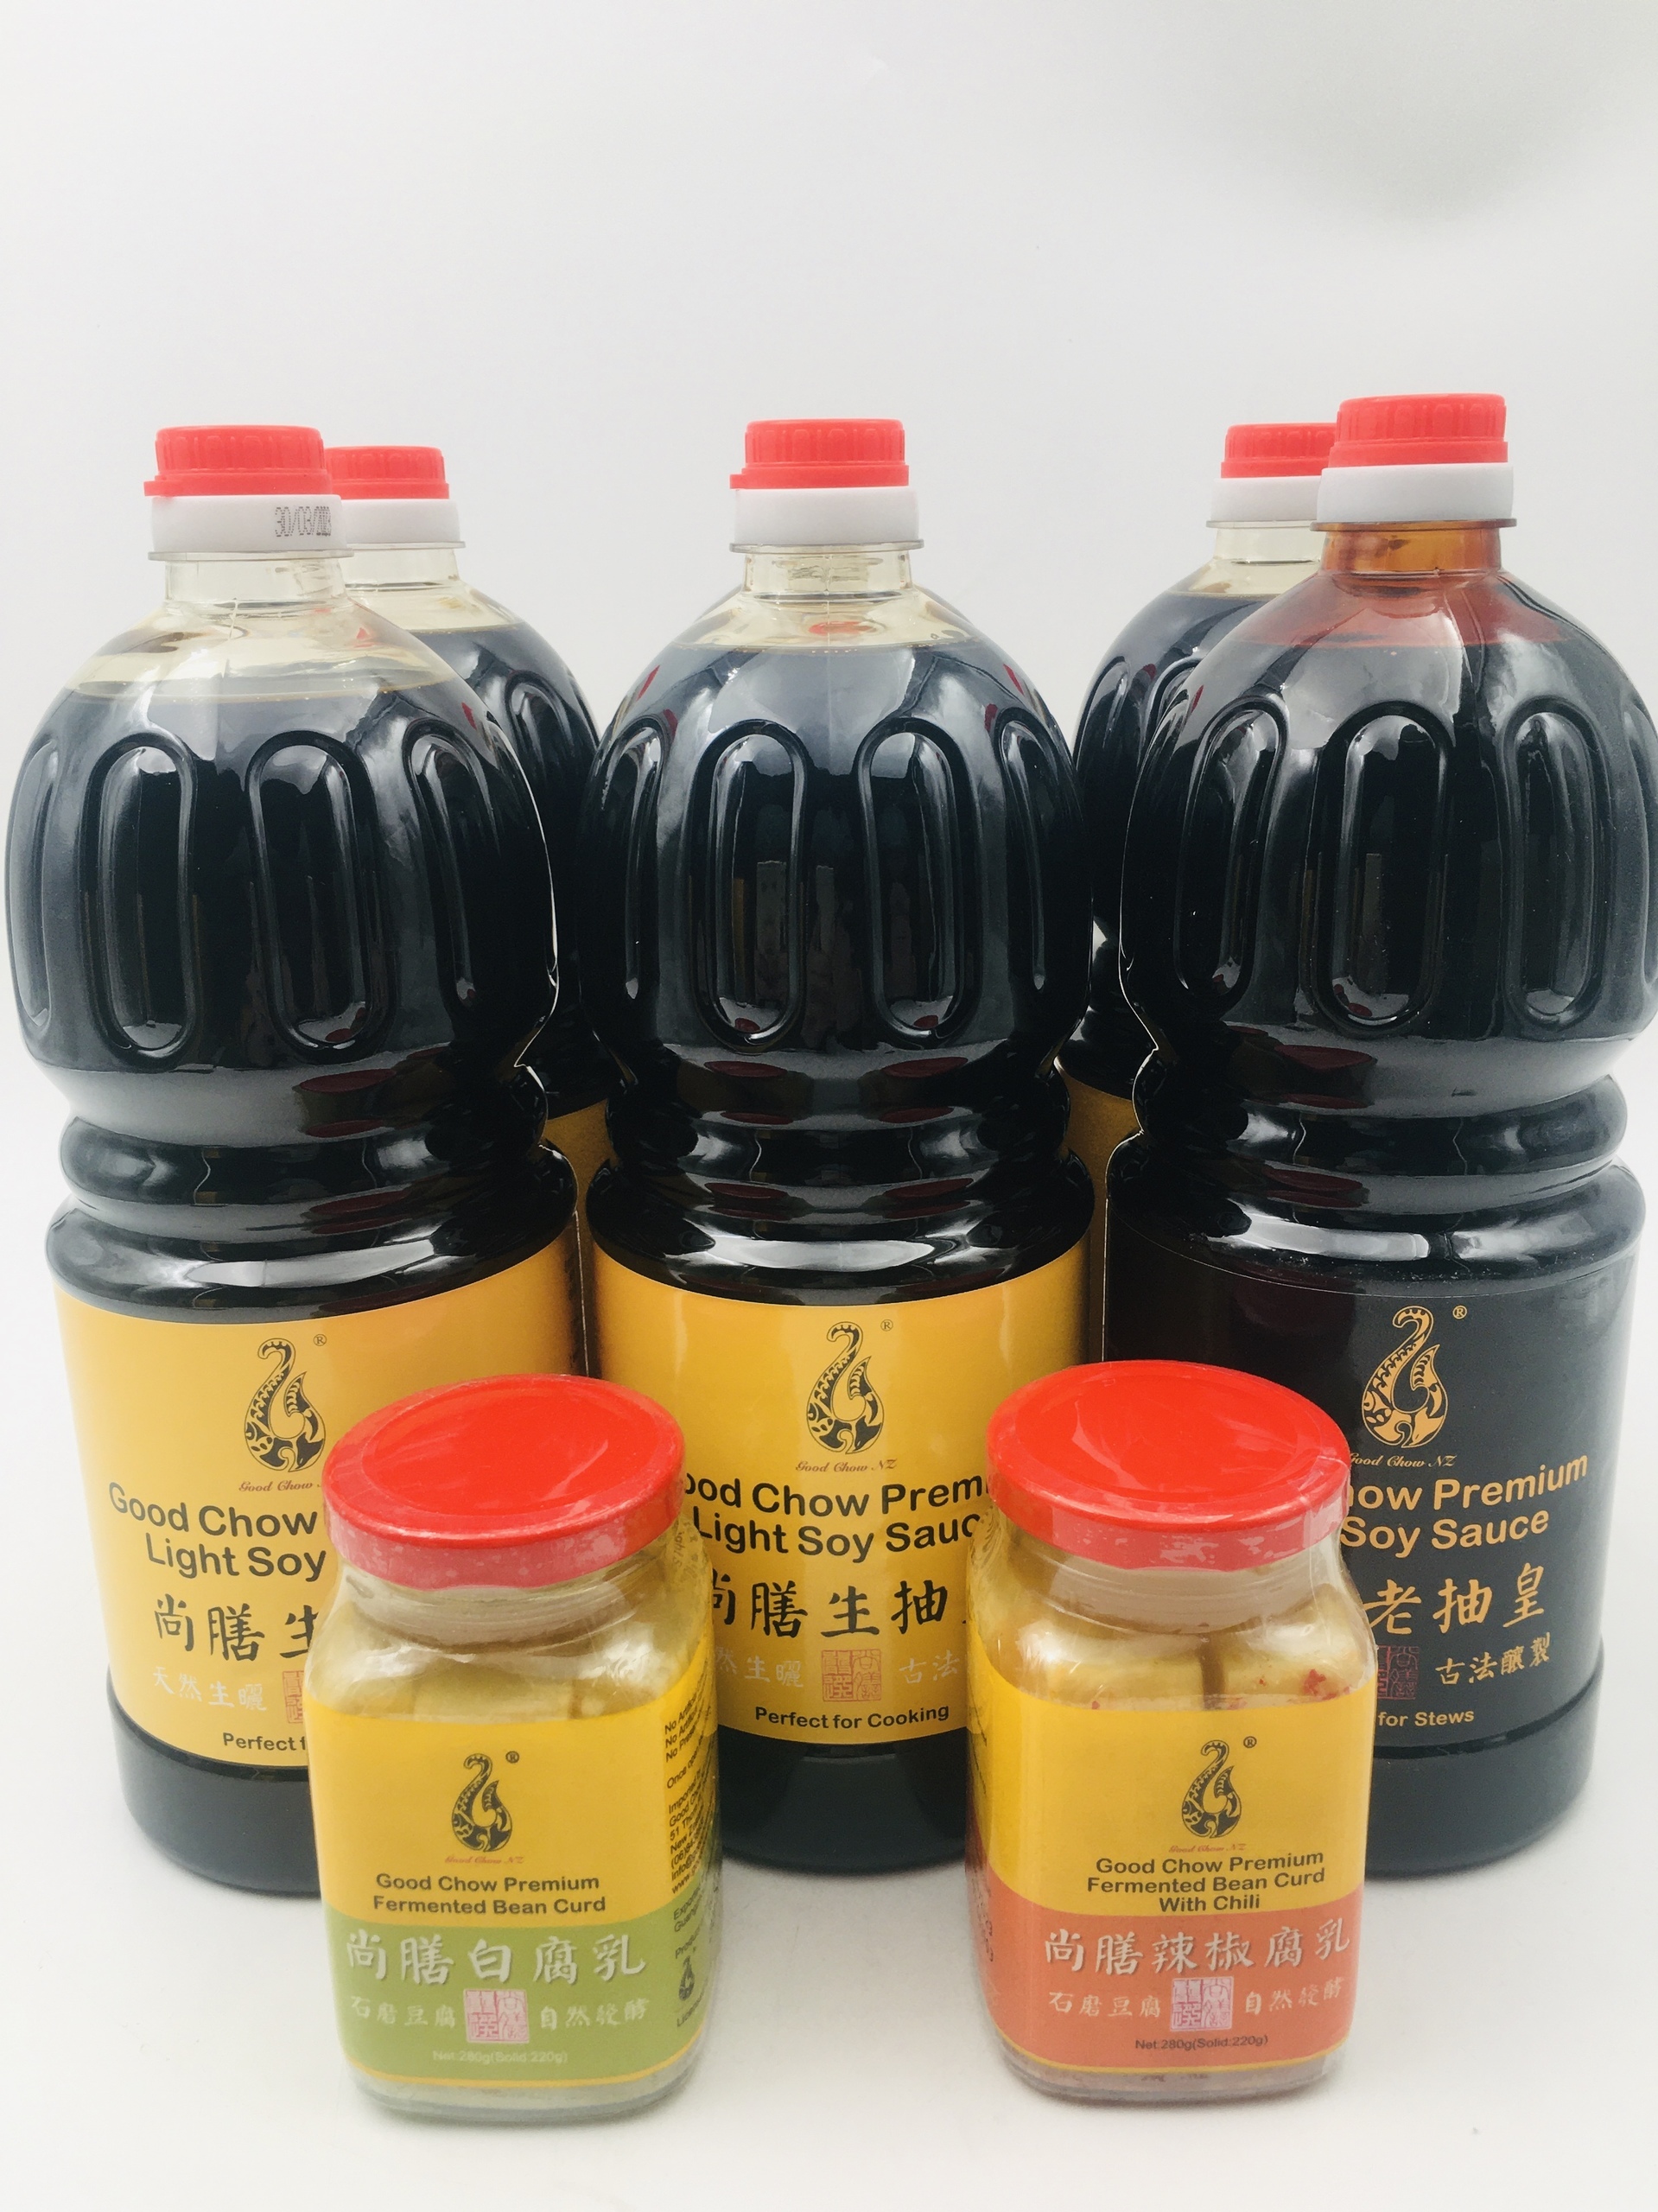 Premium Soy Sauce and Fermented Beancurd Combo